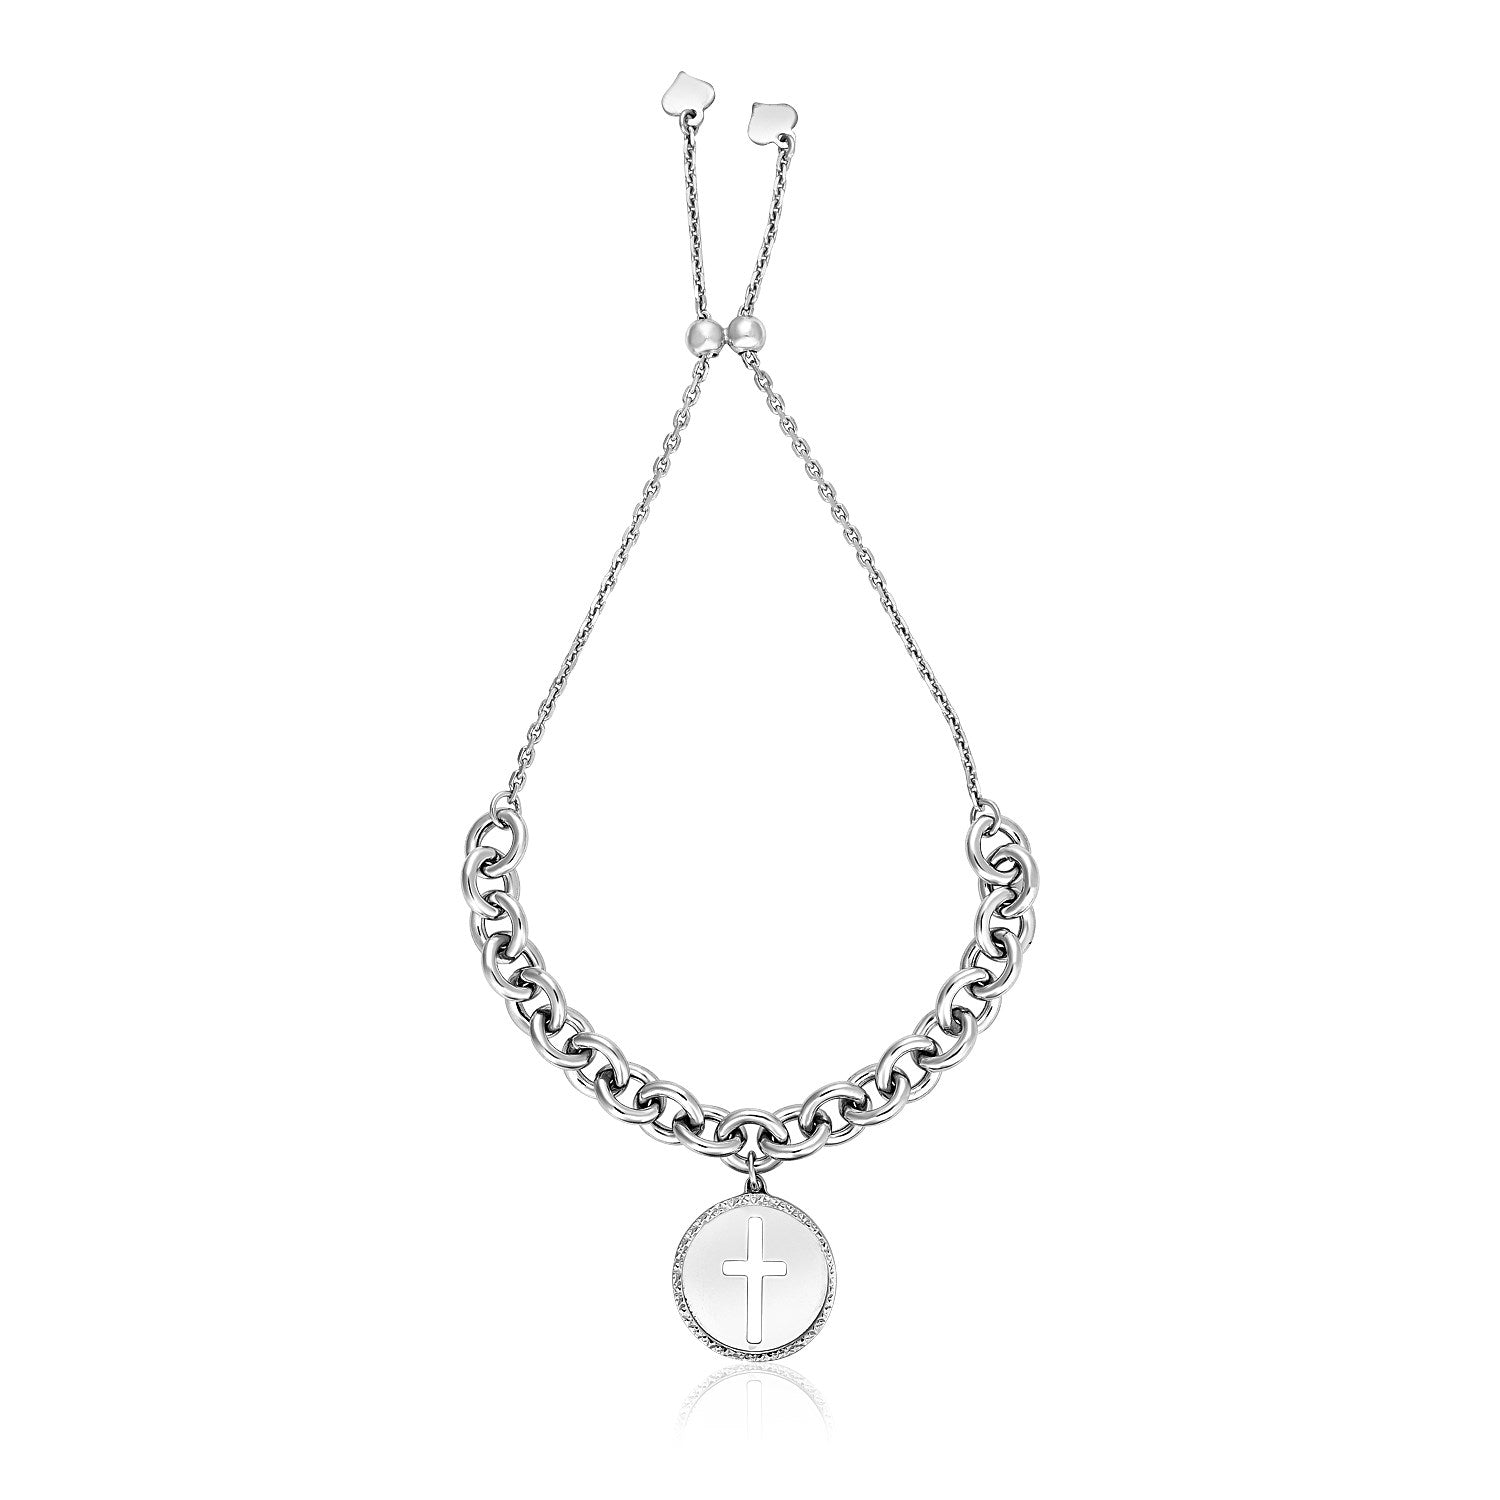 Sterling Silver 9 1/4 inch Adjustable Bracelet with Chain and Cross Charm